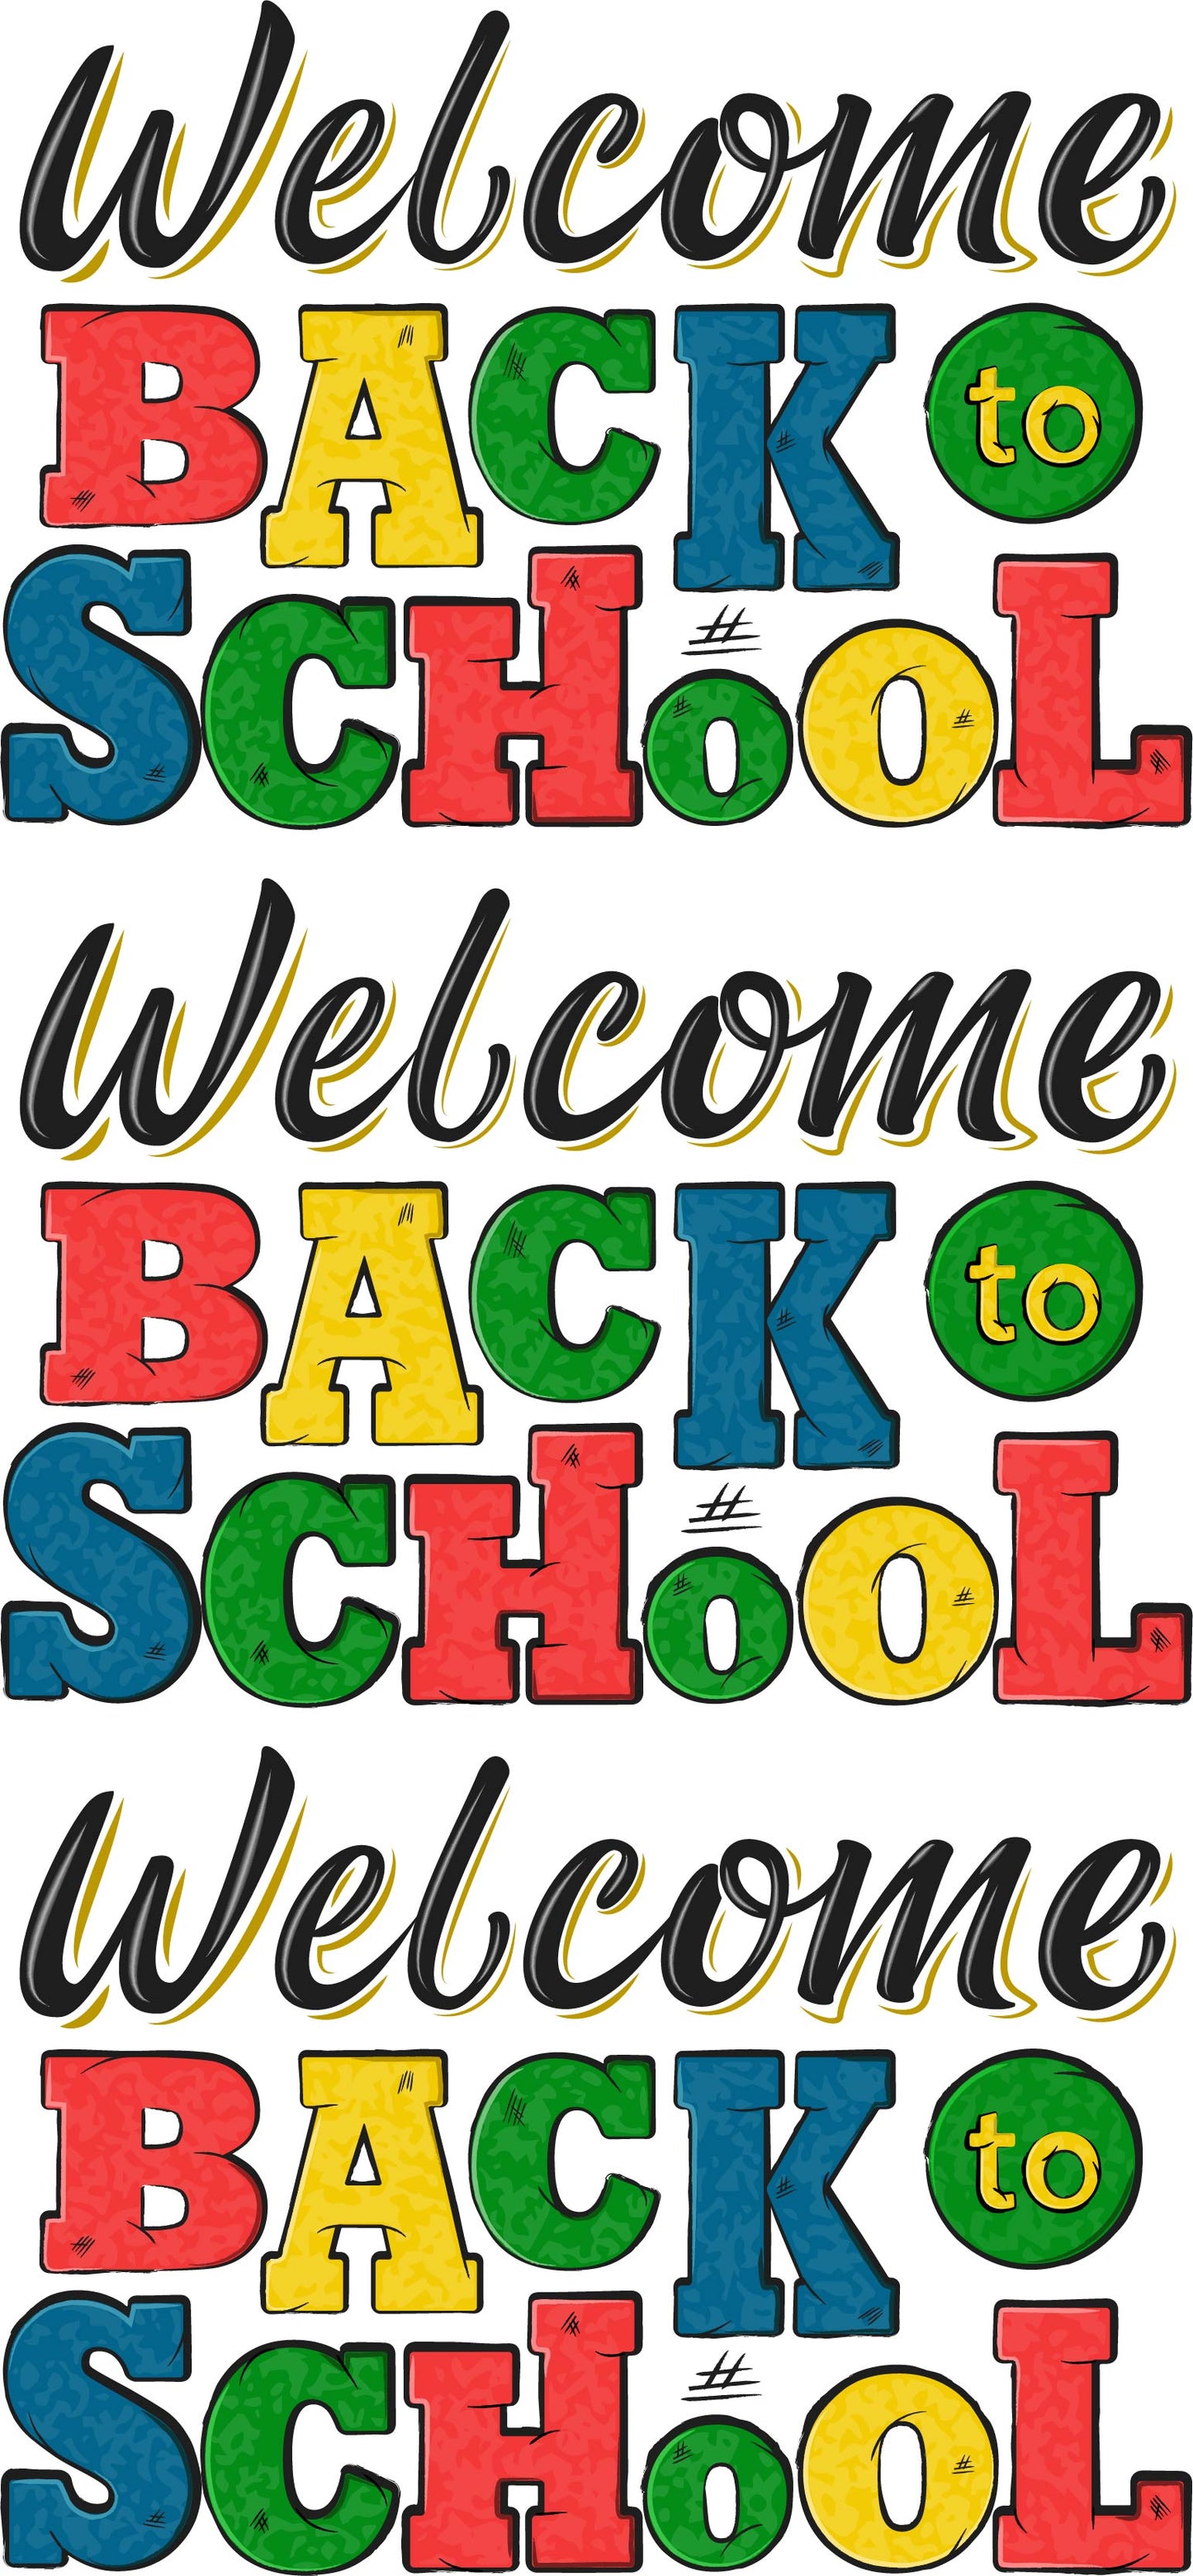 School - Back to School - Welcome Back Signs x 3 - Full Sheet